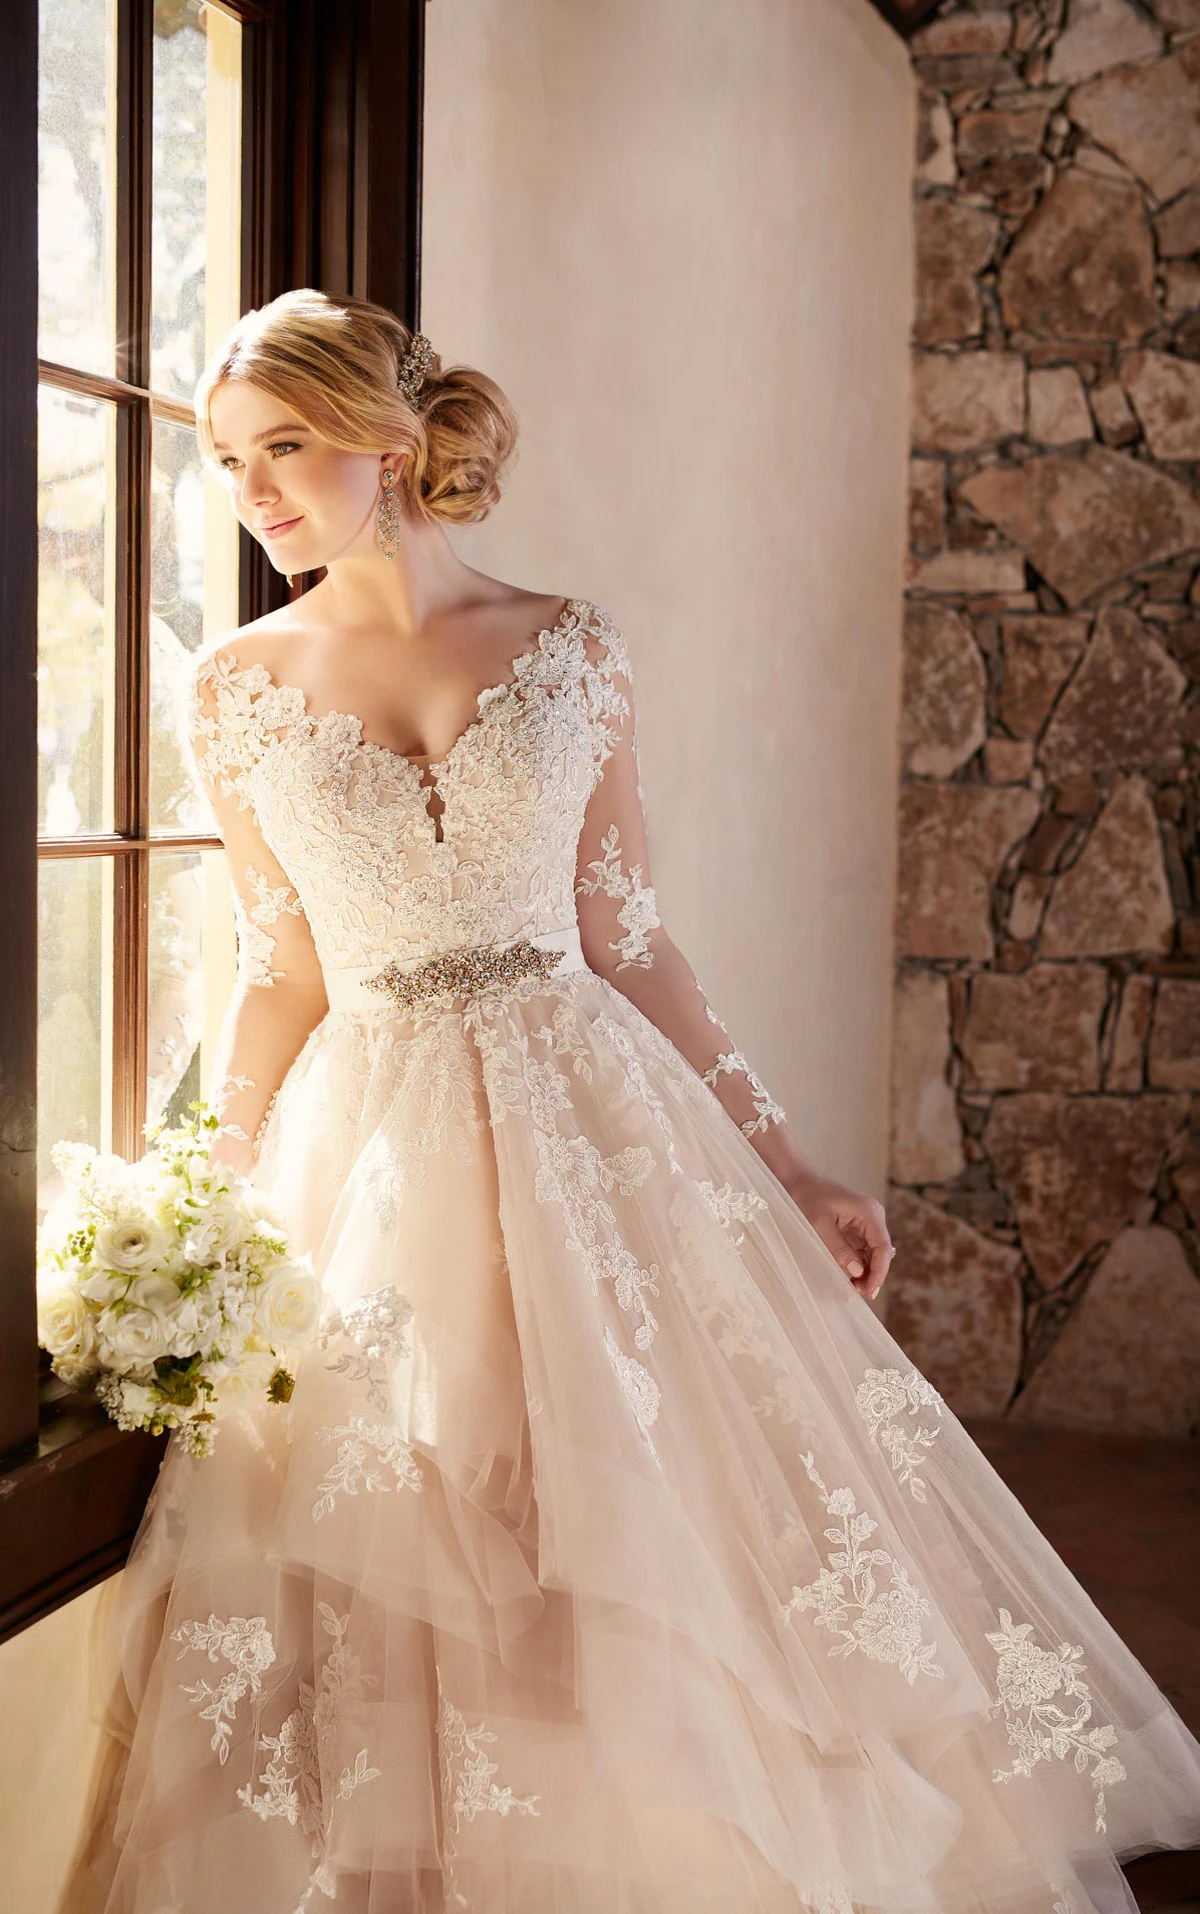 Sleeved tulle wedding dress with illusion lace   Essense of ...